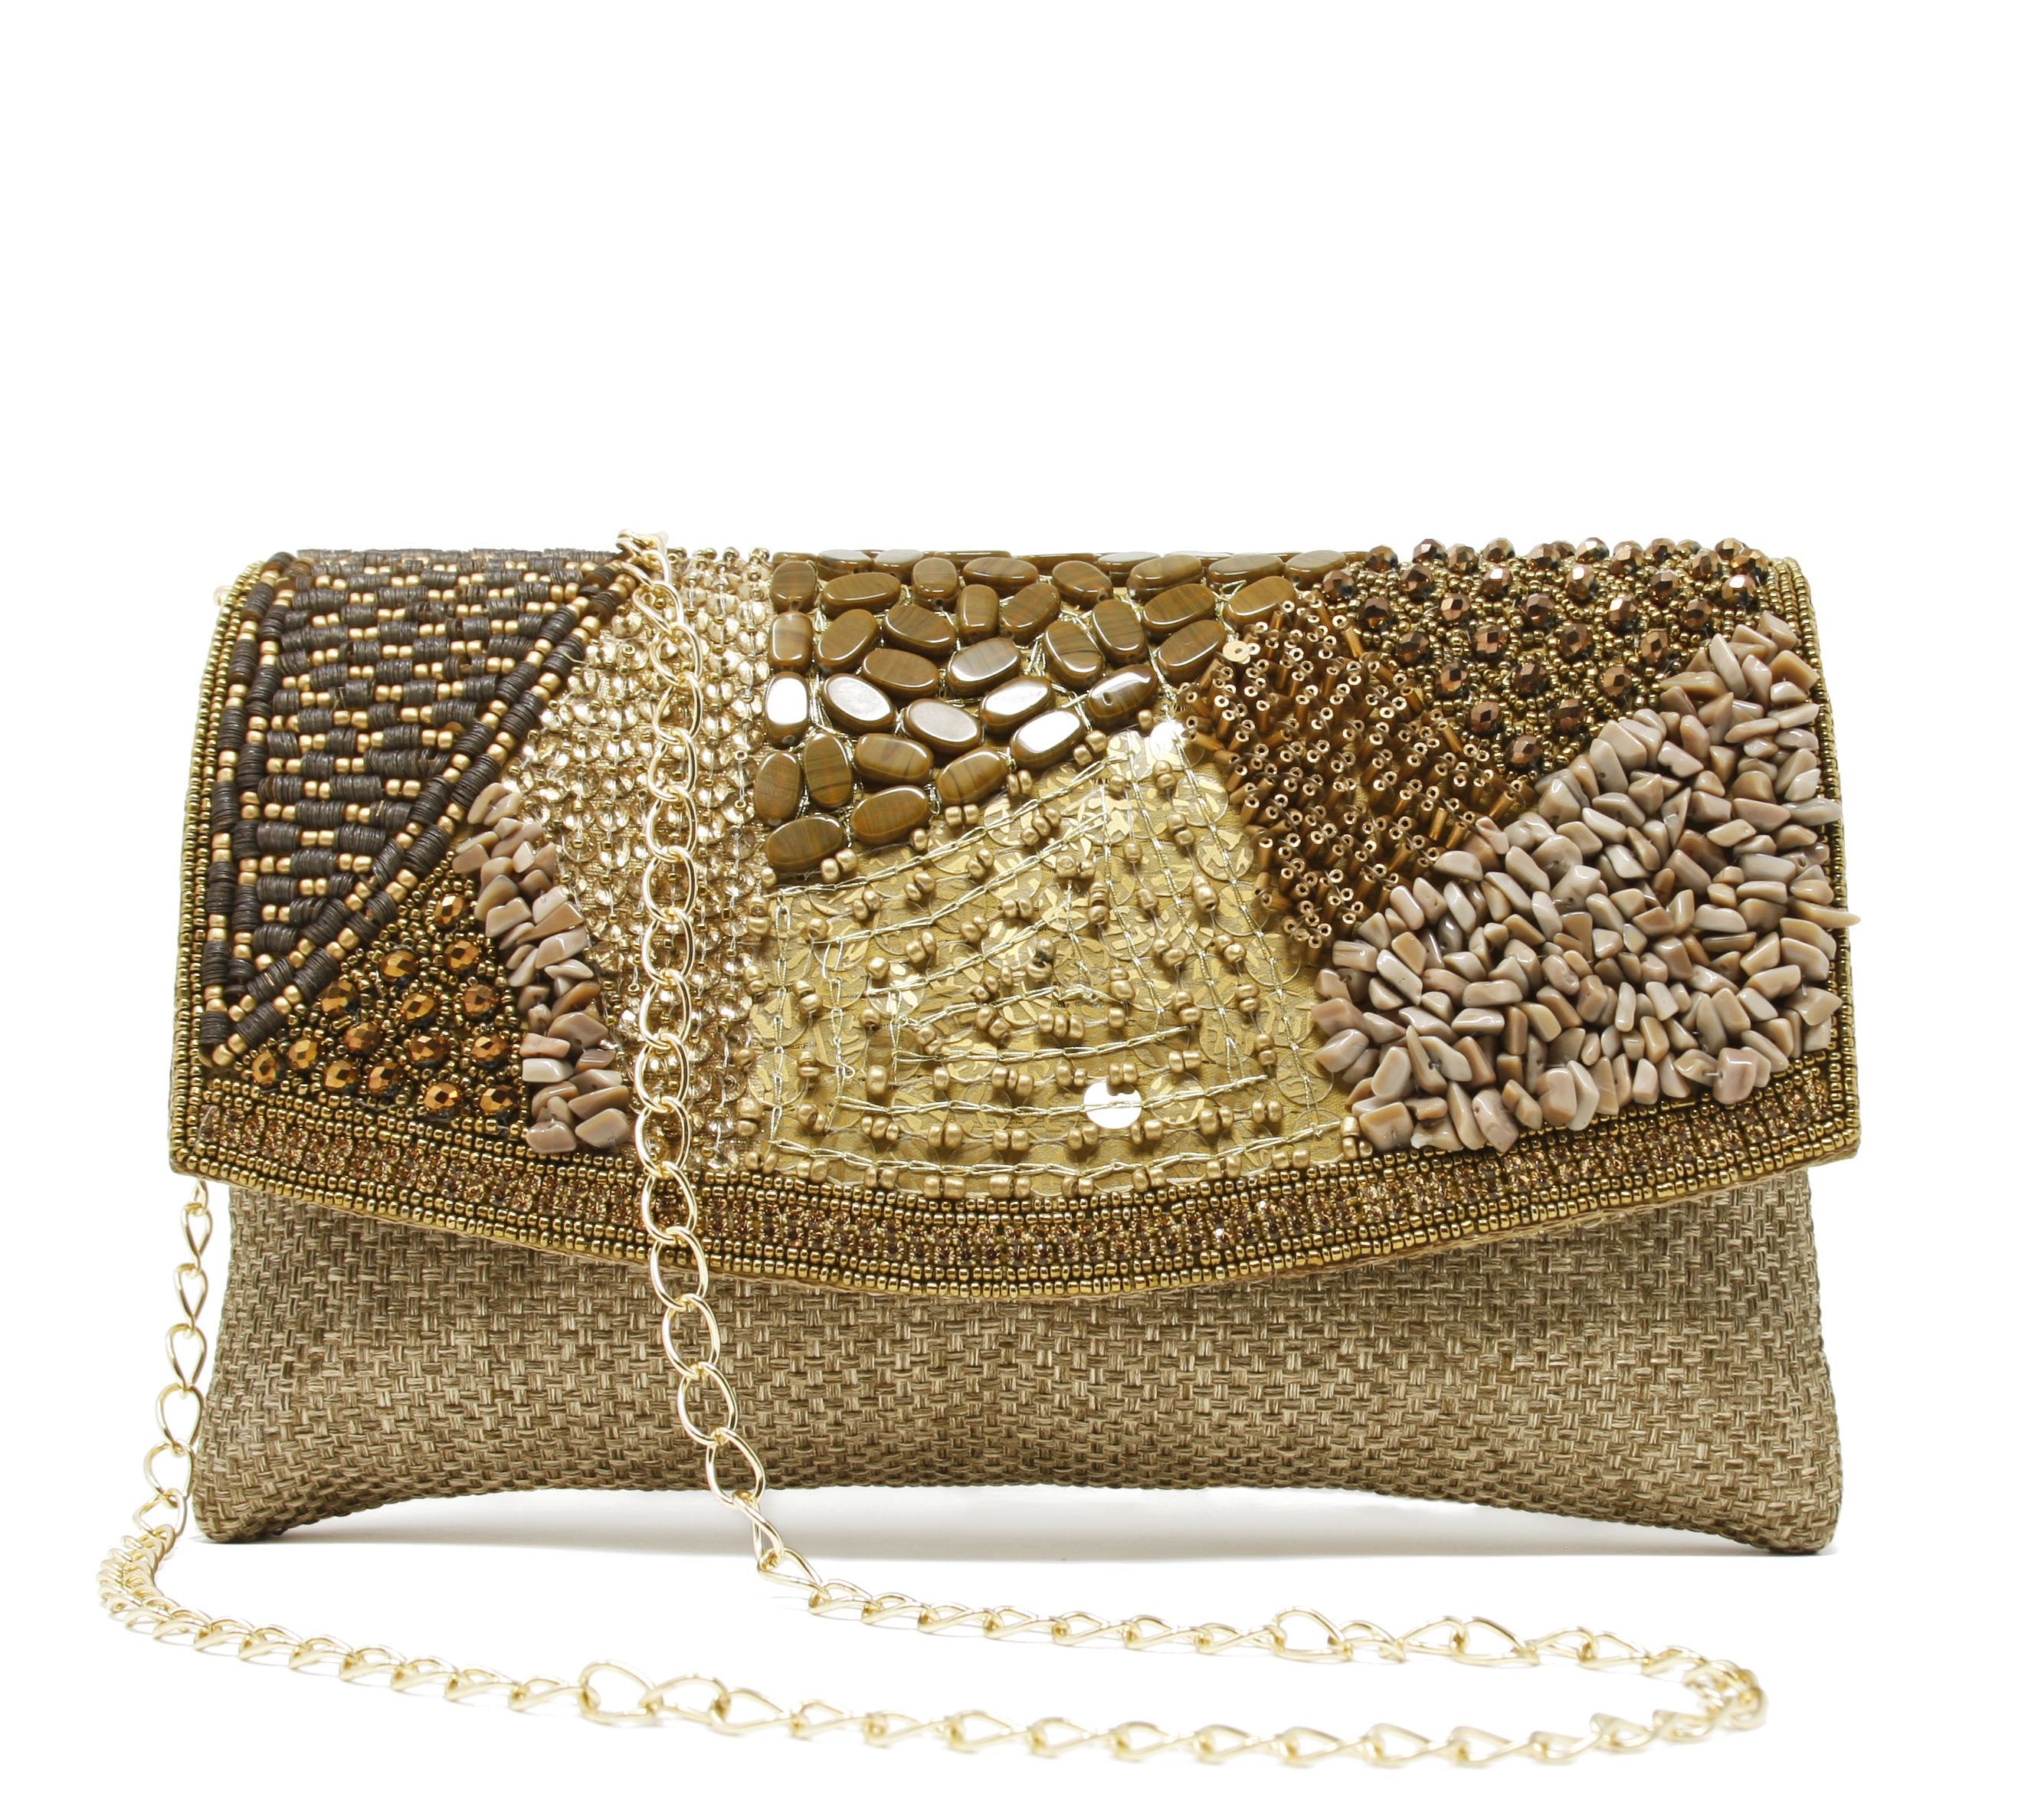 Beige clutch with patches of gold and shades of brown, & has a inside pocket